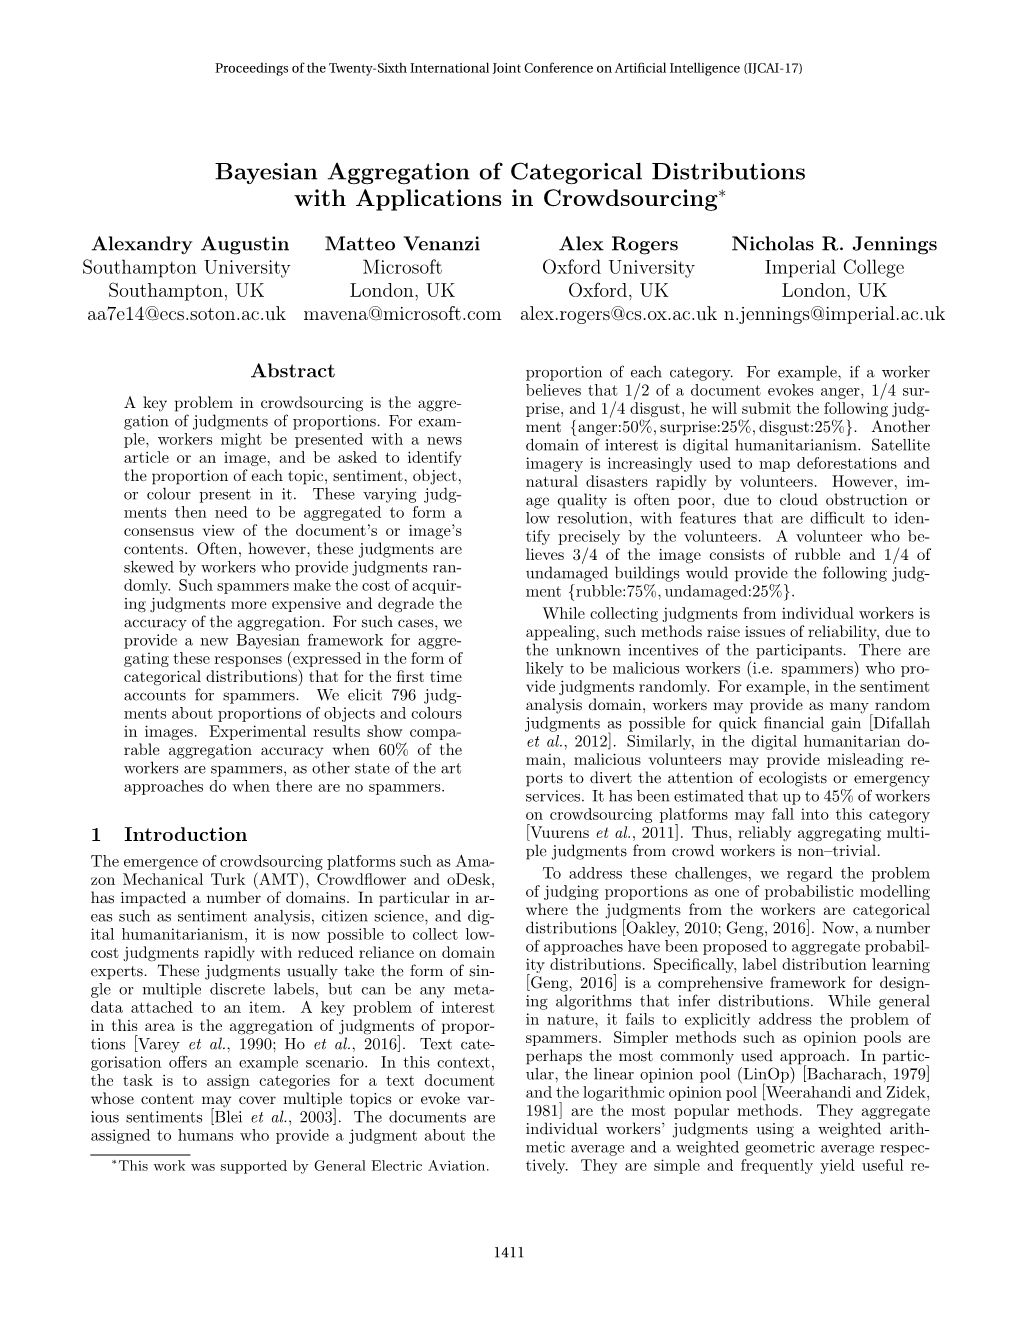 Bayesian Aggregation of Categorical Distributions with Applications in Crowdsourcing∗